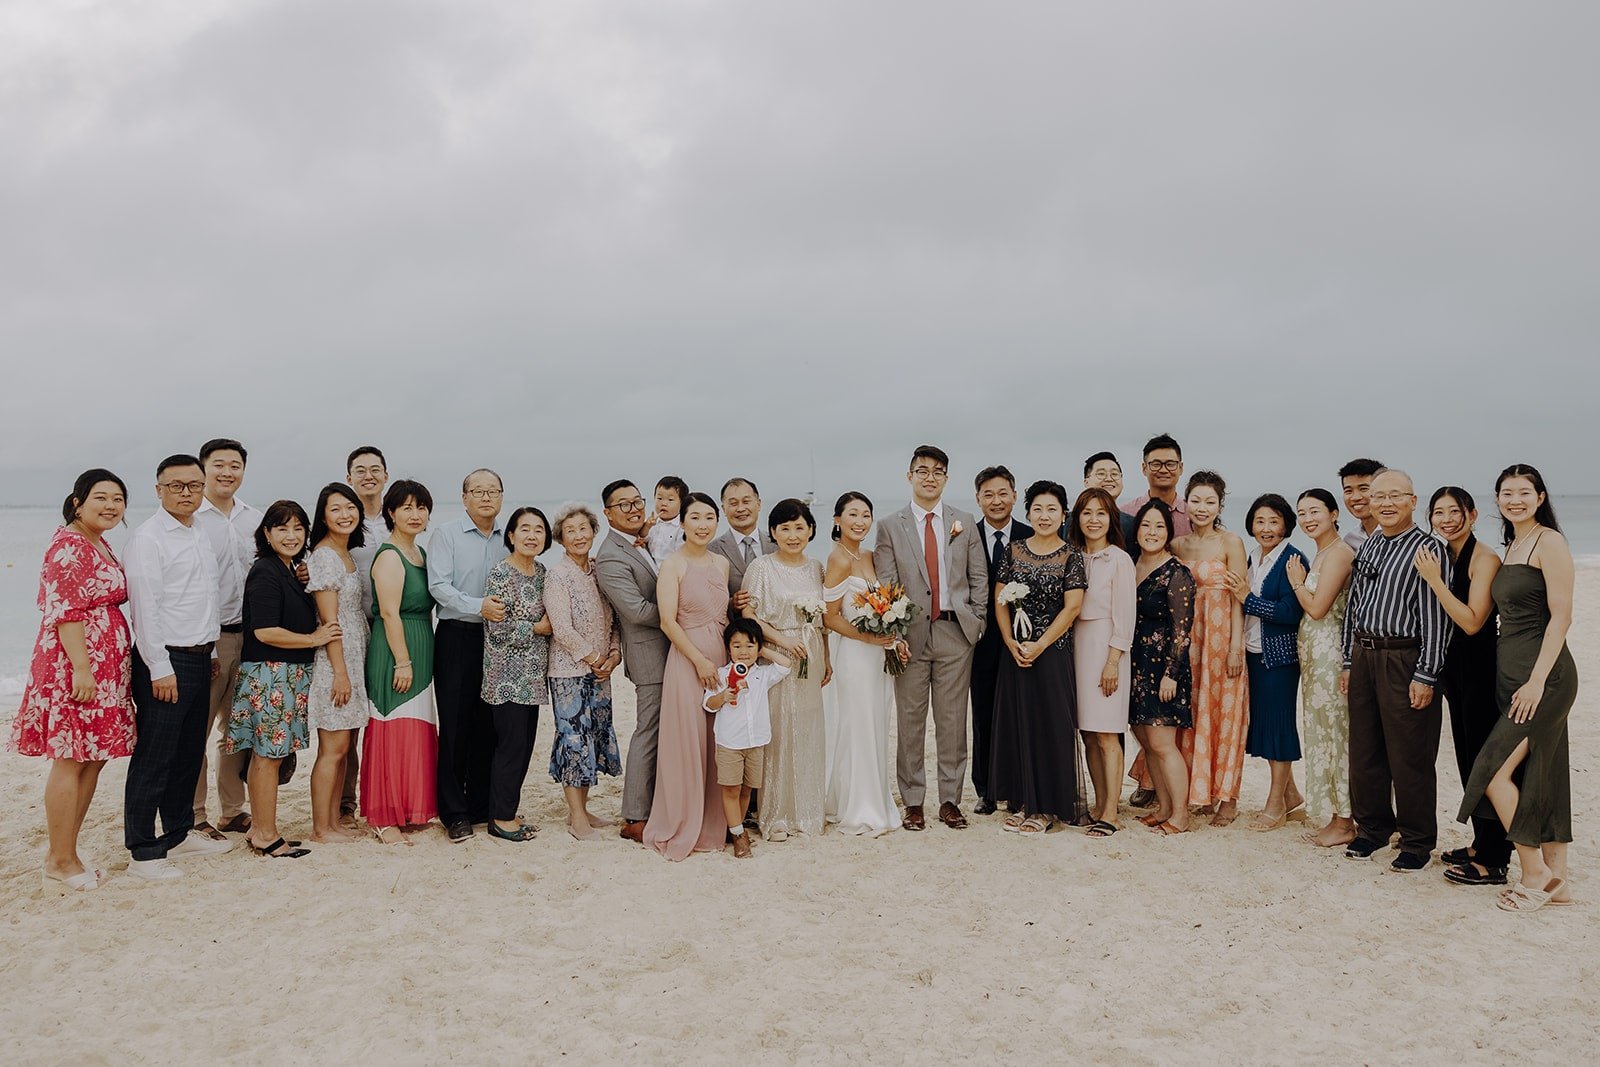 Bride and groom with guests at their beach wedding in Mexico